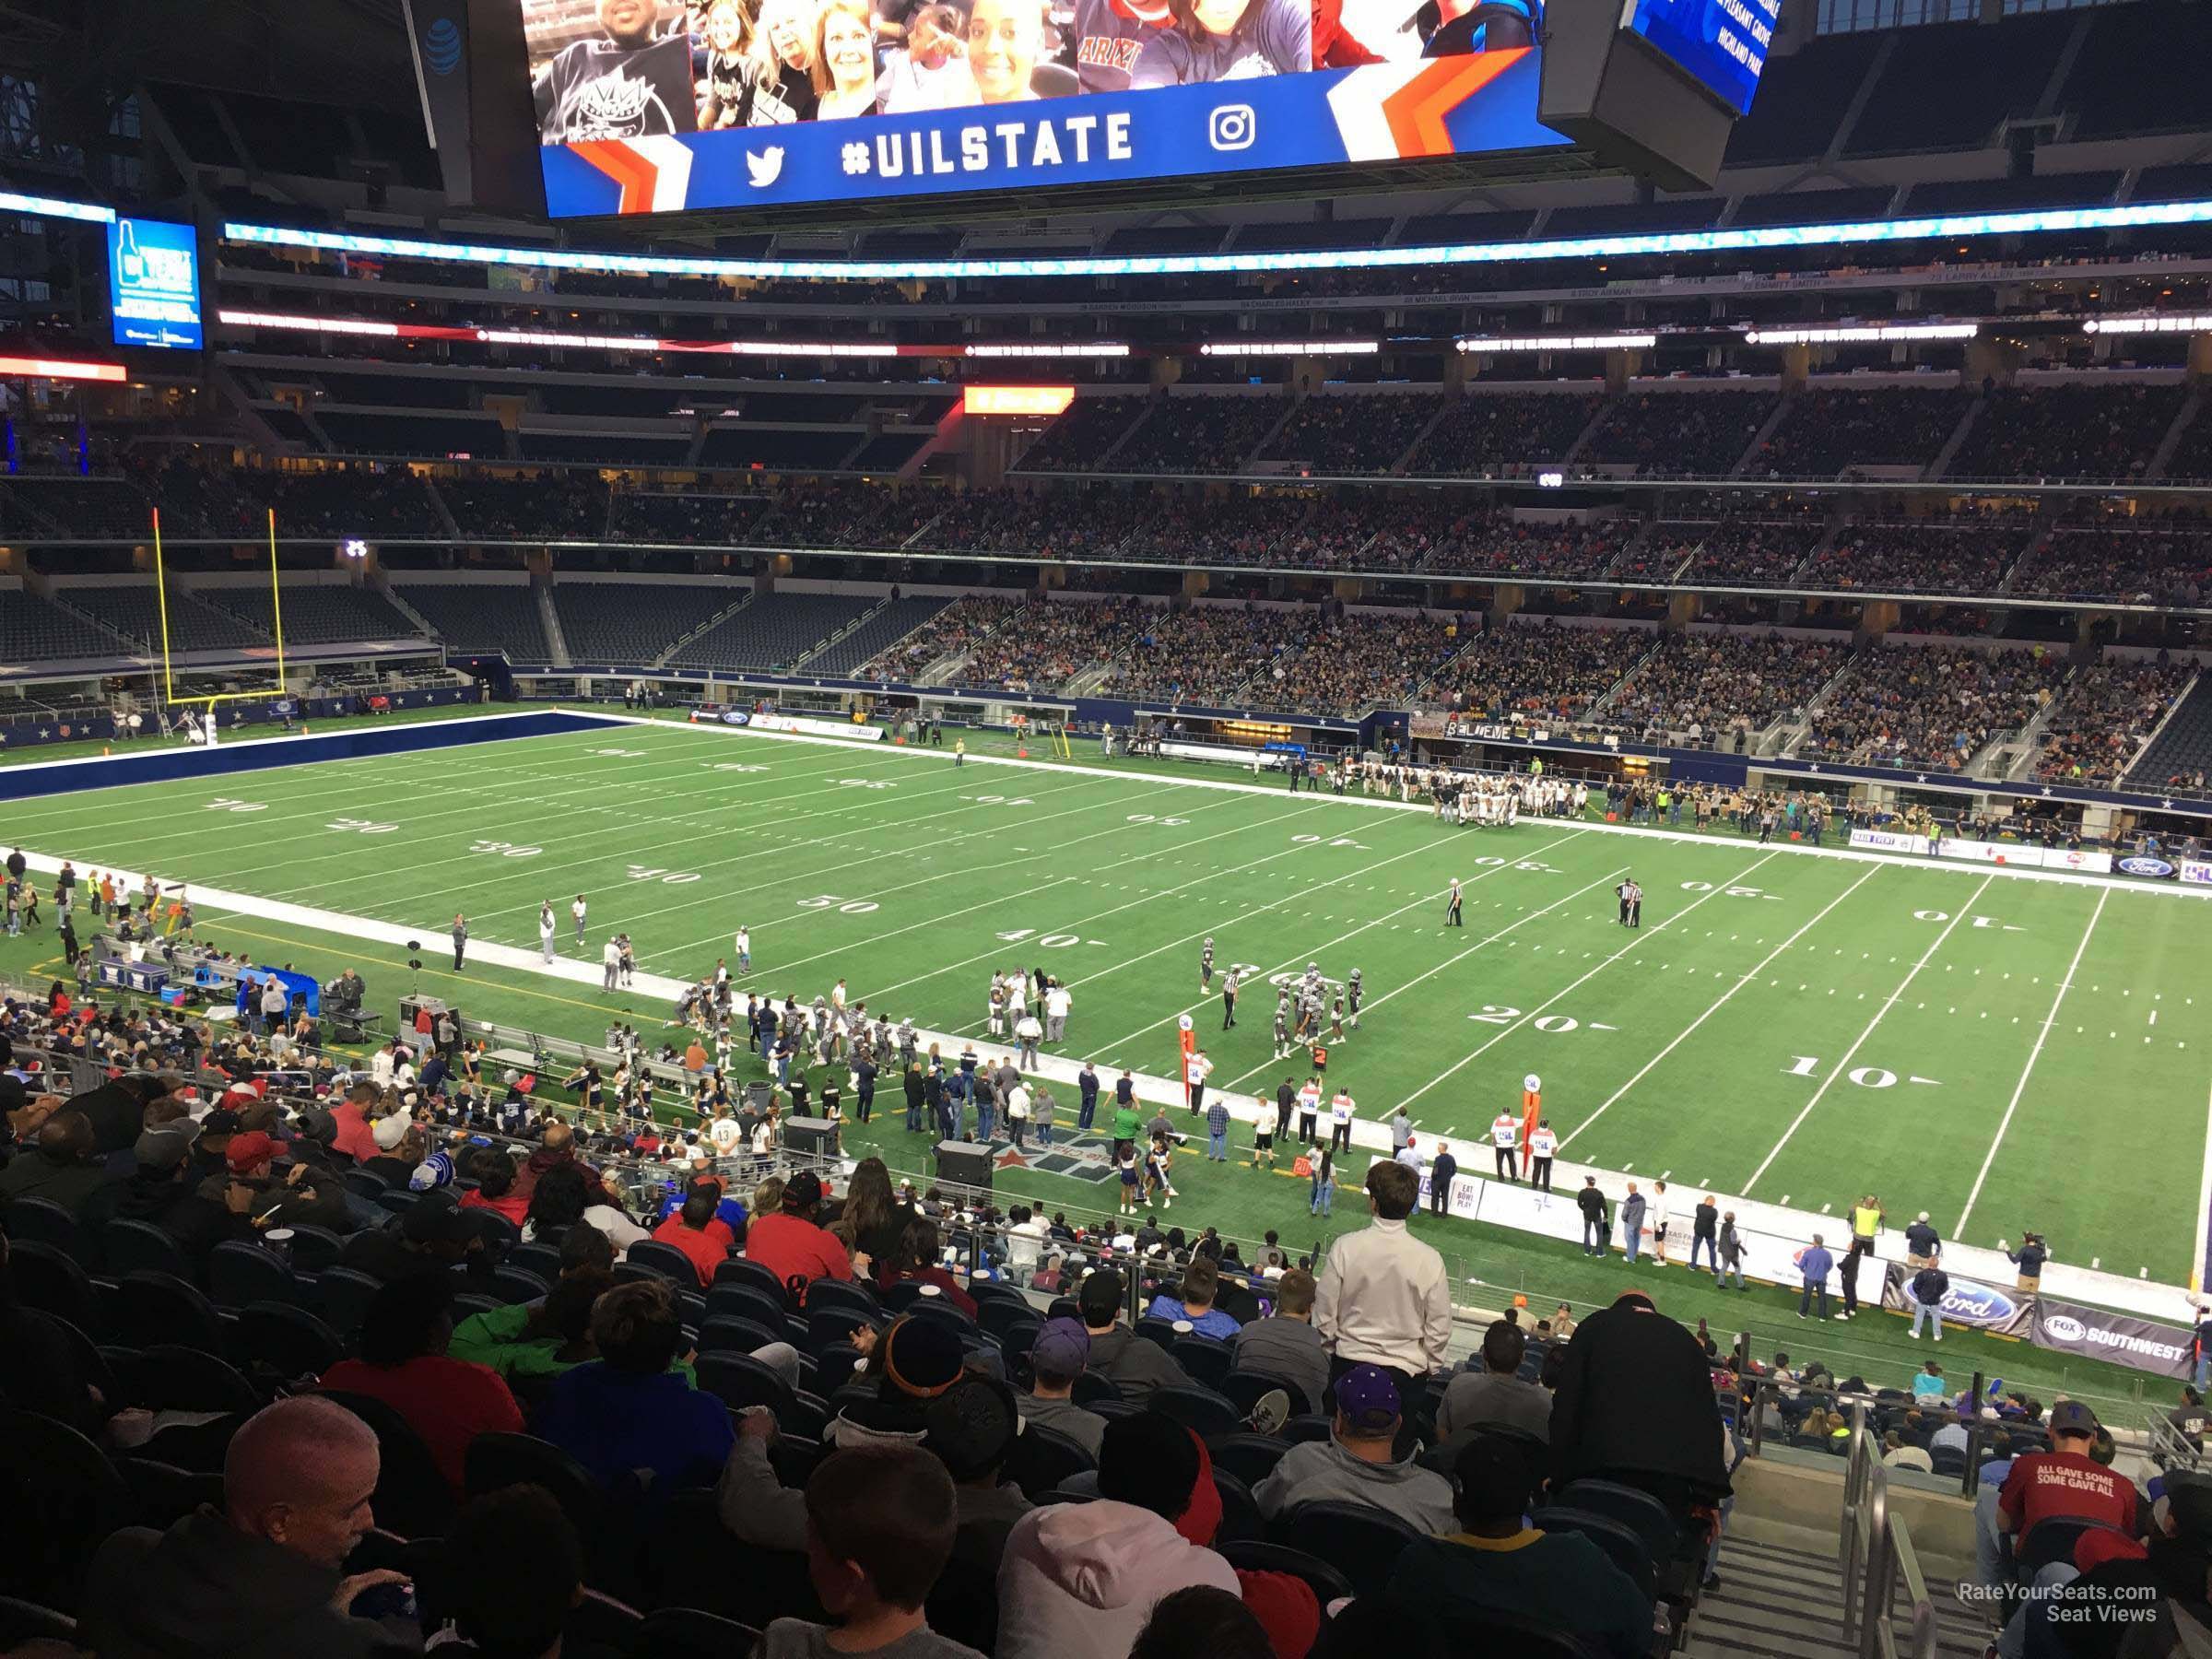 section c206, row 14 seat view  for football - at&t stadium (cowboys stadium)